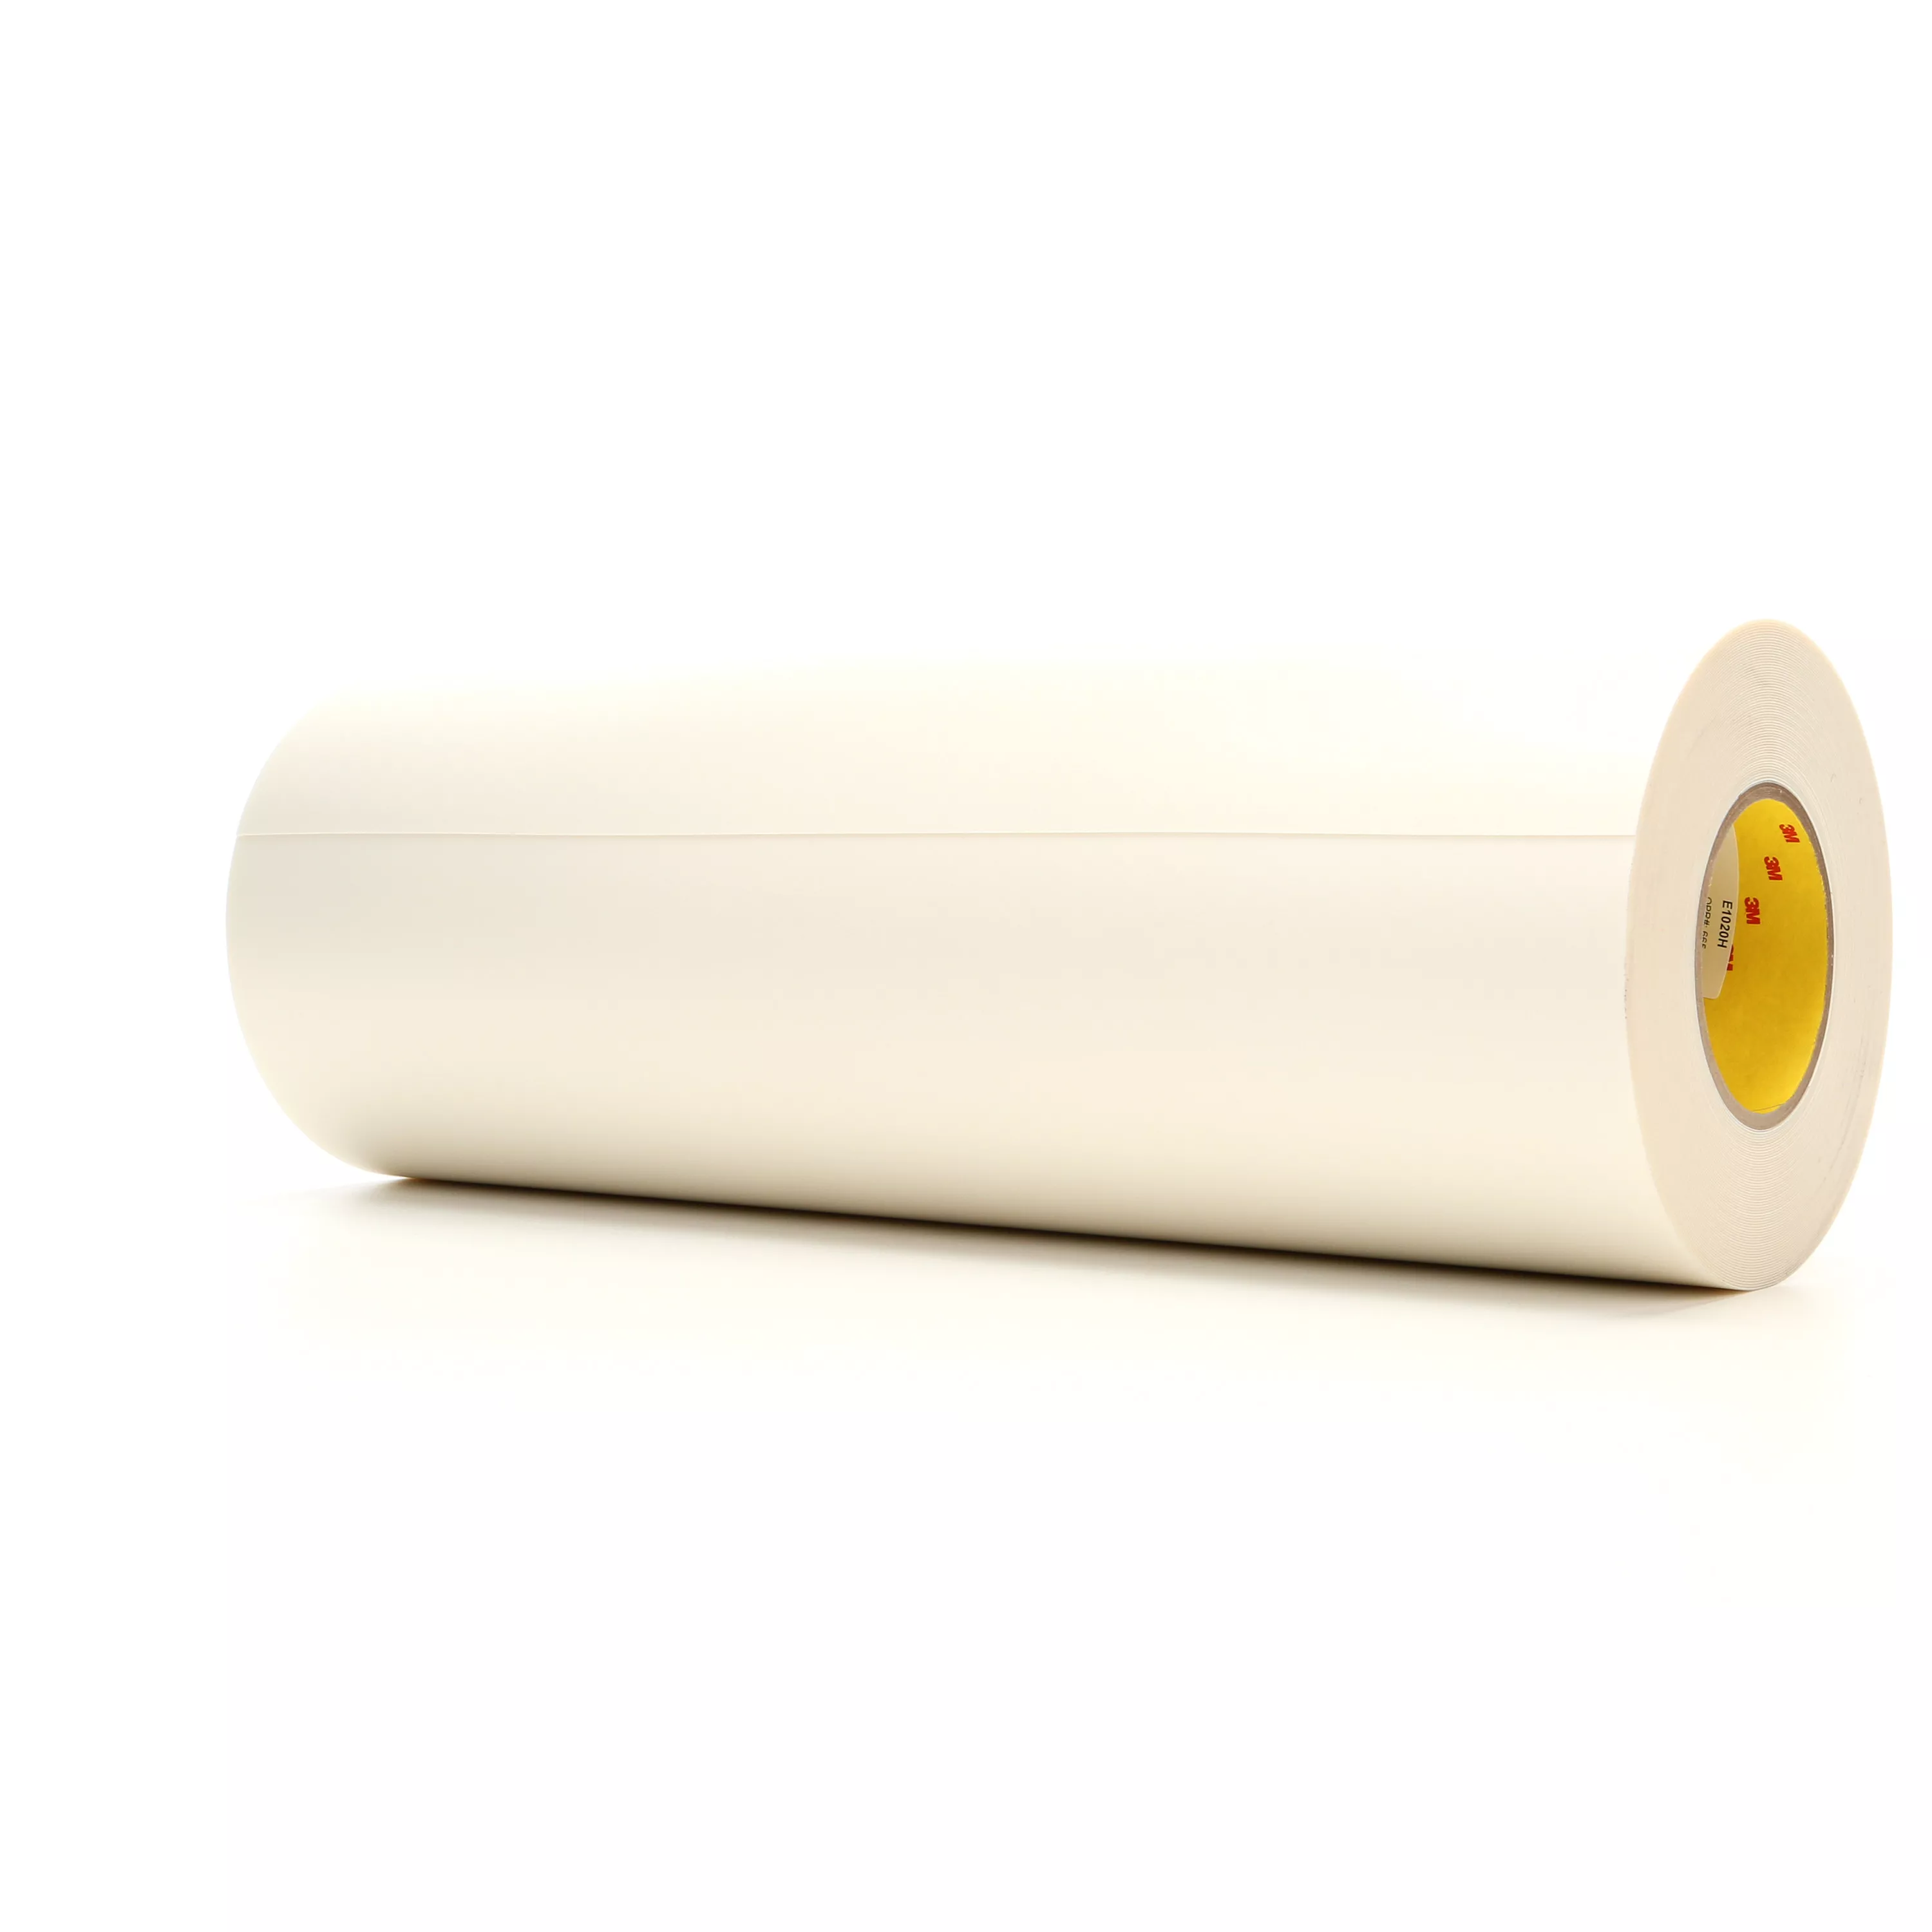 3M™ Cushion-Mount™ Plus Plate Mounting Tape E1020H, White, 18 in x 25
yd, 20 mil, 1 Roll/Case